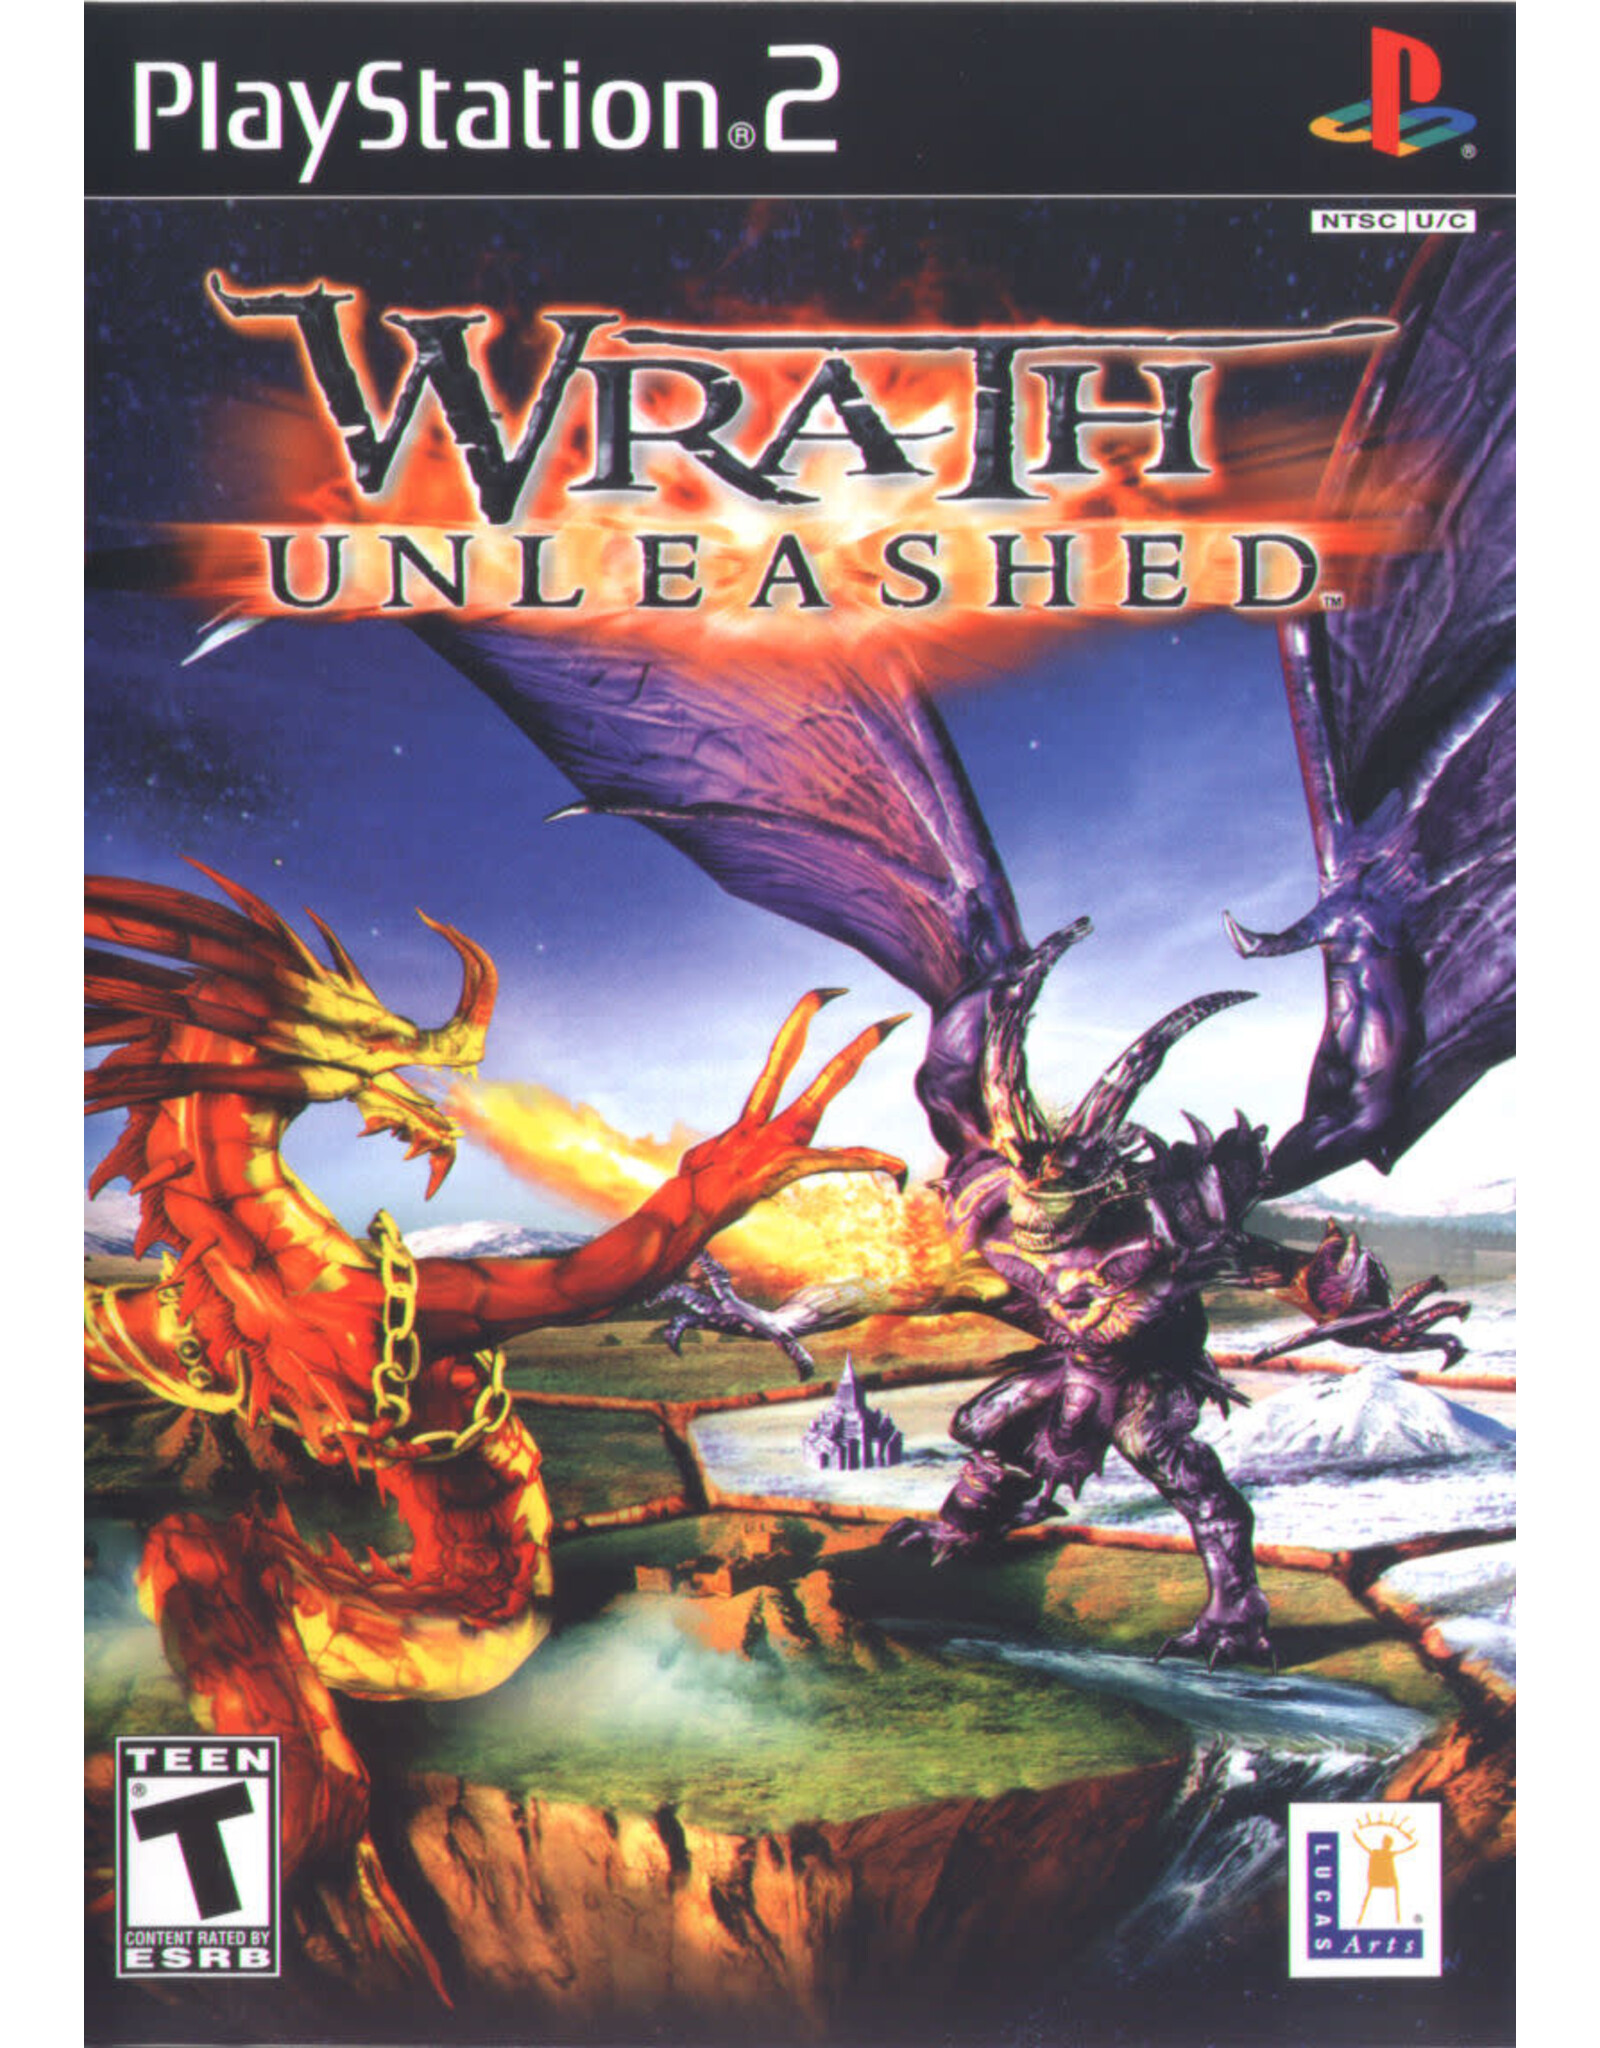 Playstation 2 Wrath Unleashed (No Manual, Sticker on Disc)